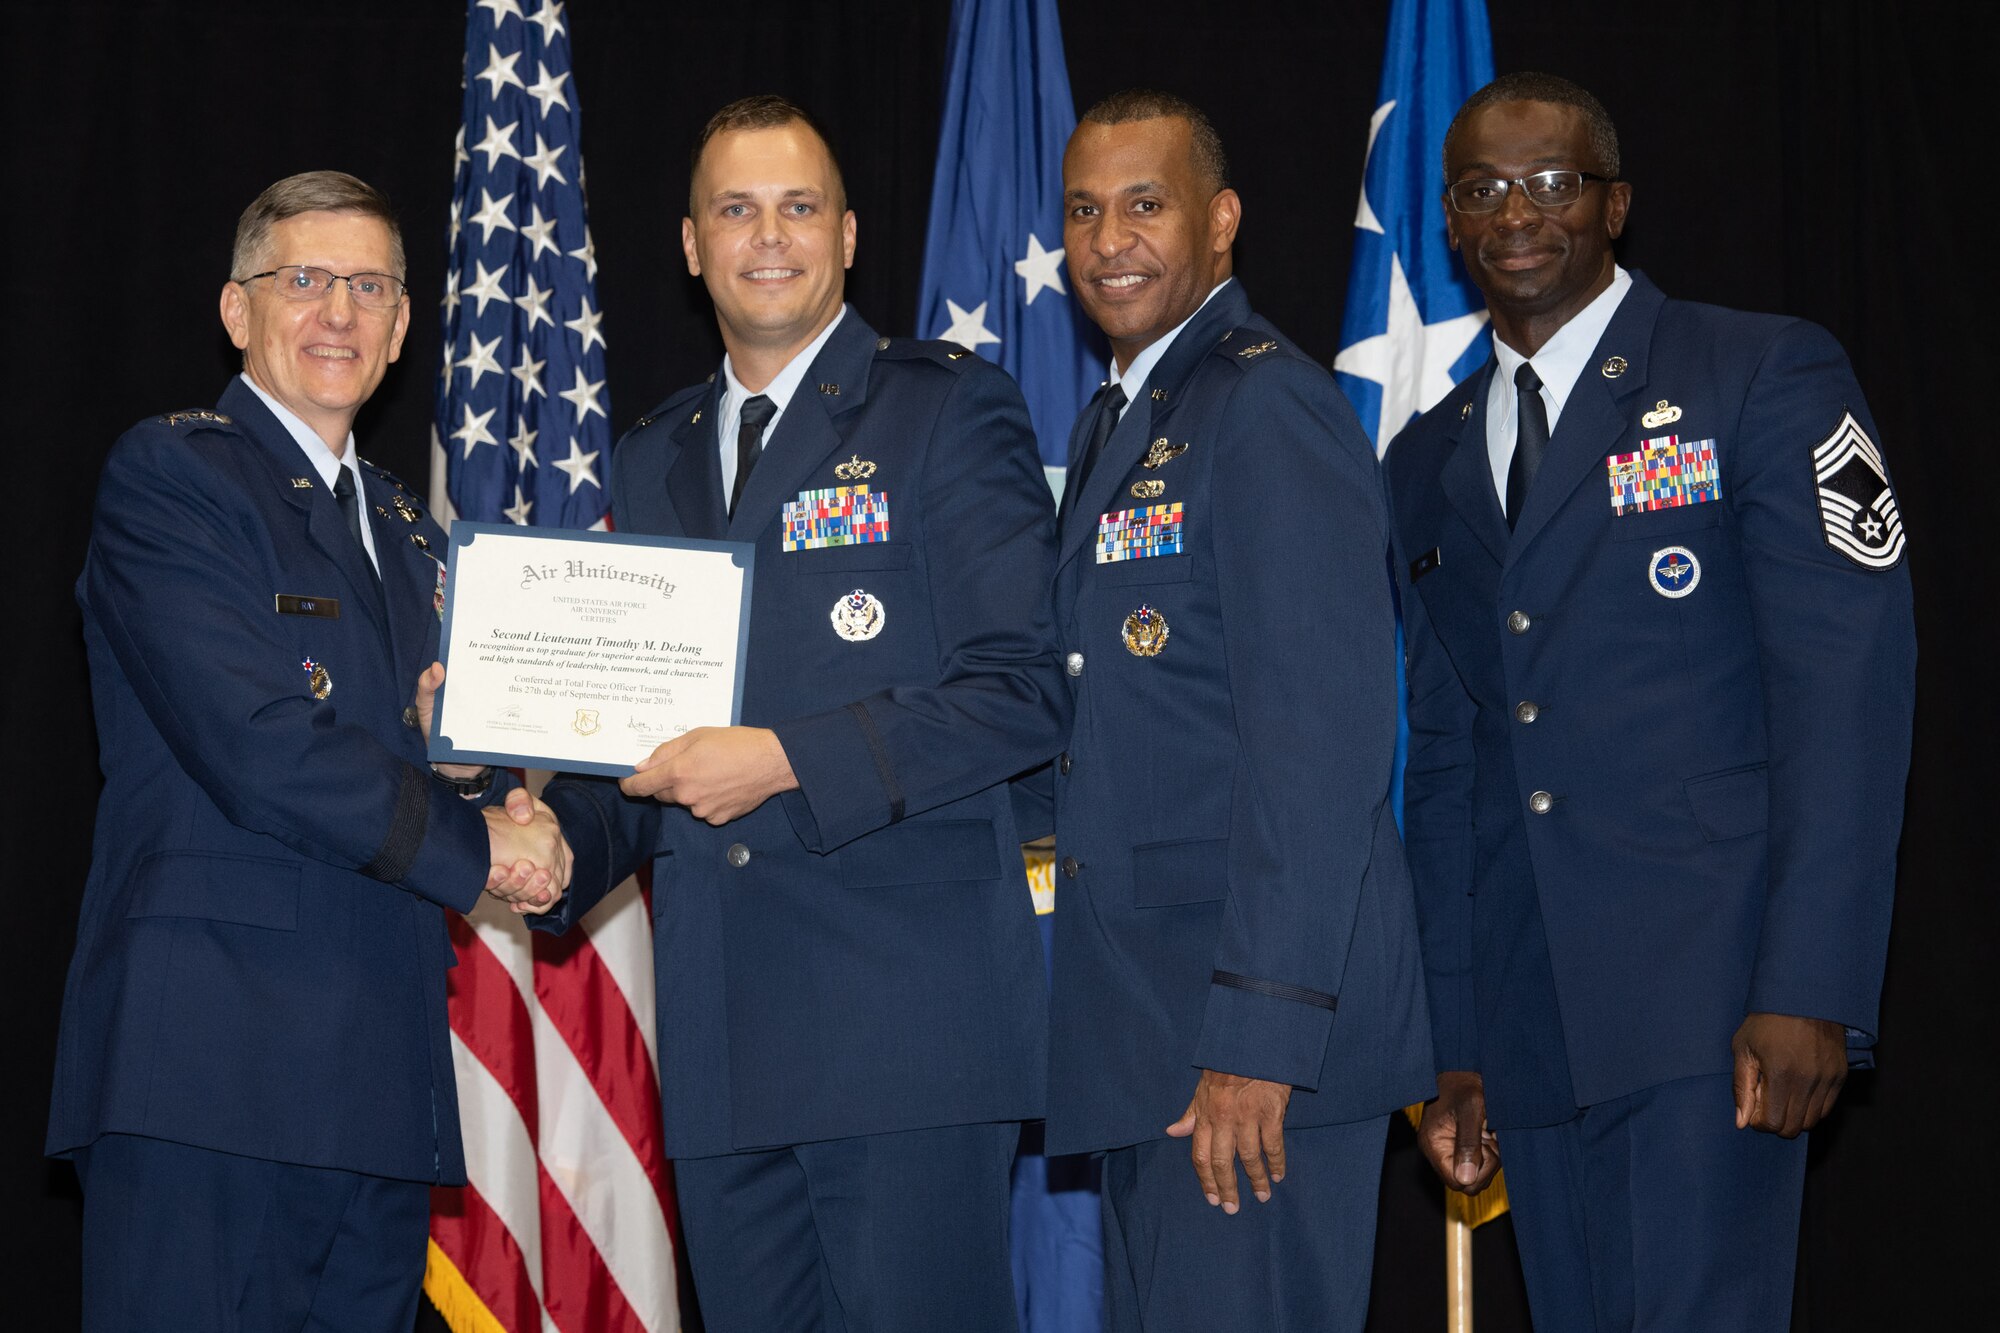 Gen. Tim Ray, Air Force Global Strike Command commander, presents the top graduate award for Detachment 12 to 2nd Lt. Timothy Dijone from Air University’s Officer Training School “Godzilla” class 19-07 during an awards ceremony at the Alabama State University Acadome, Montgomery, Ala., Sept. 26, 2019. Class 19-07, dubbed internally as “Godzilla,” started with more than 800 officer trainees, effectively double the average class size.